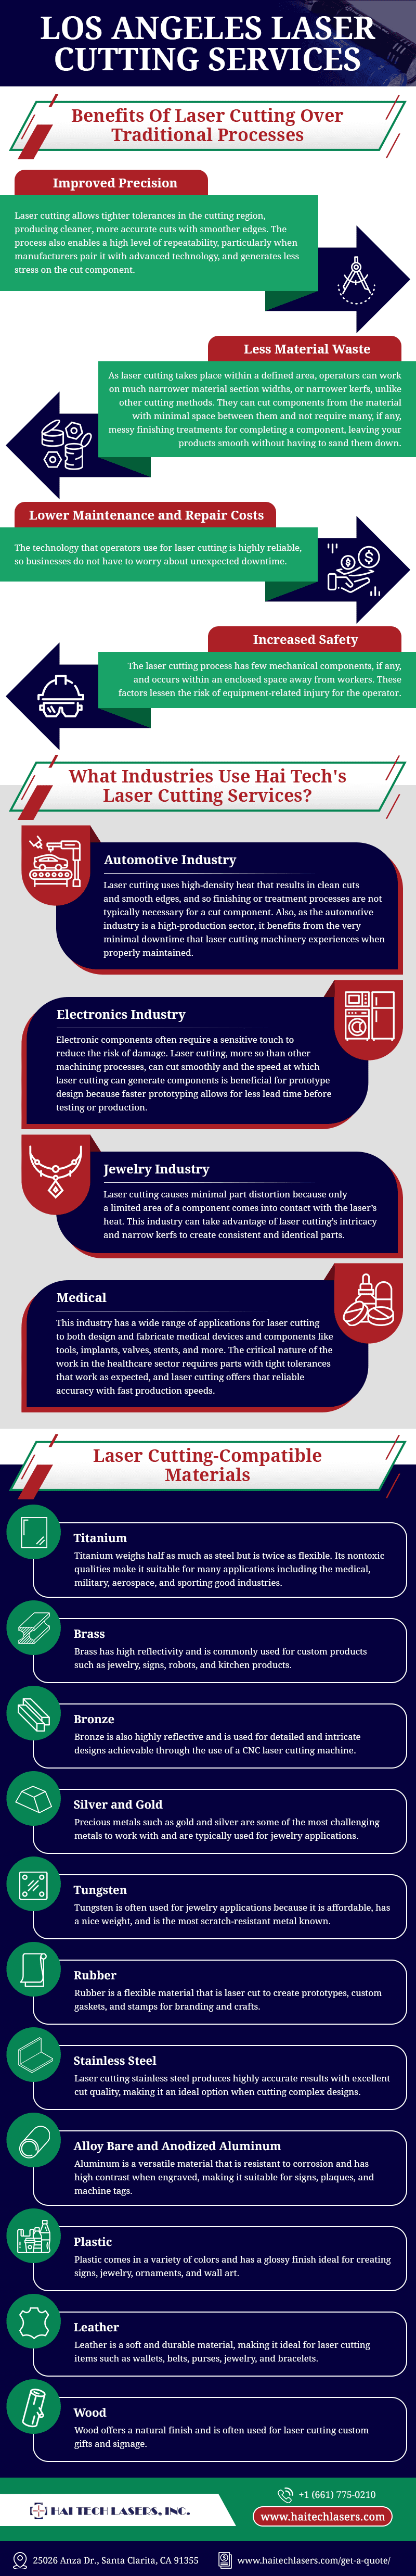 Los Angeles Laser Cutting Services